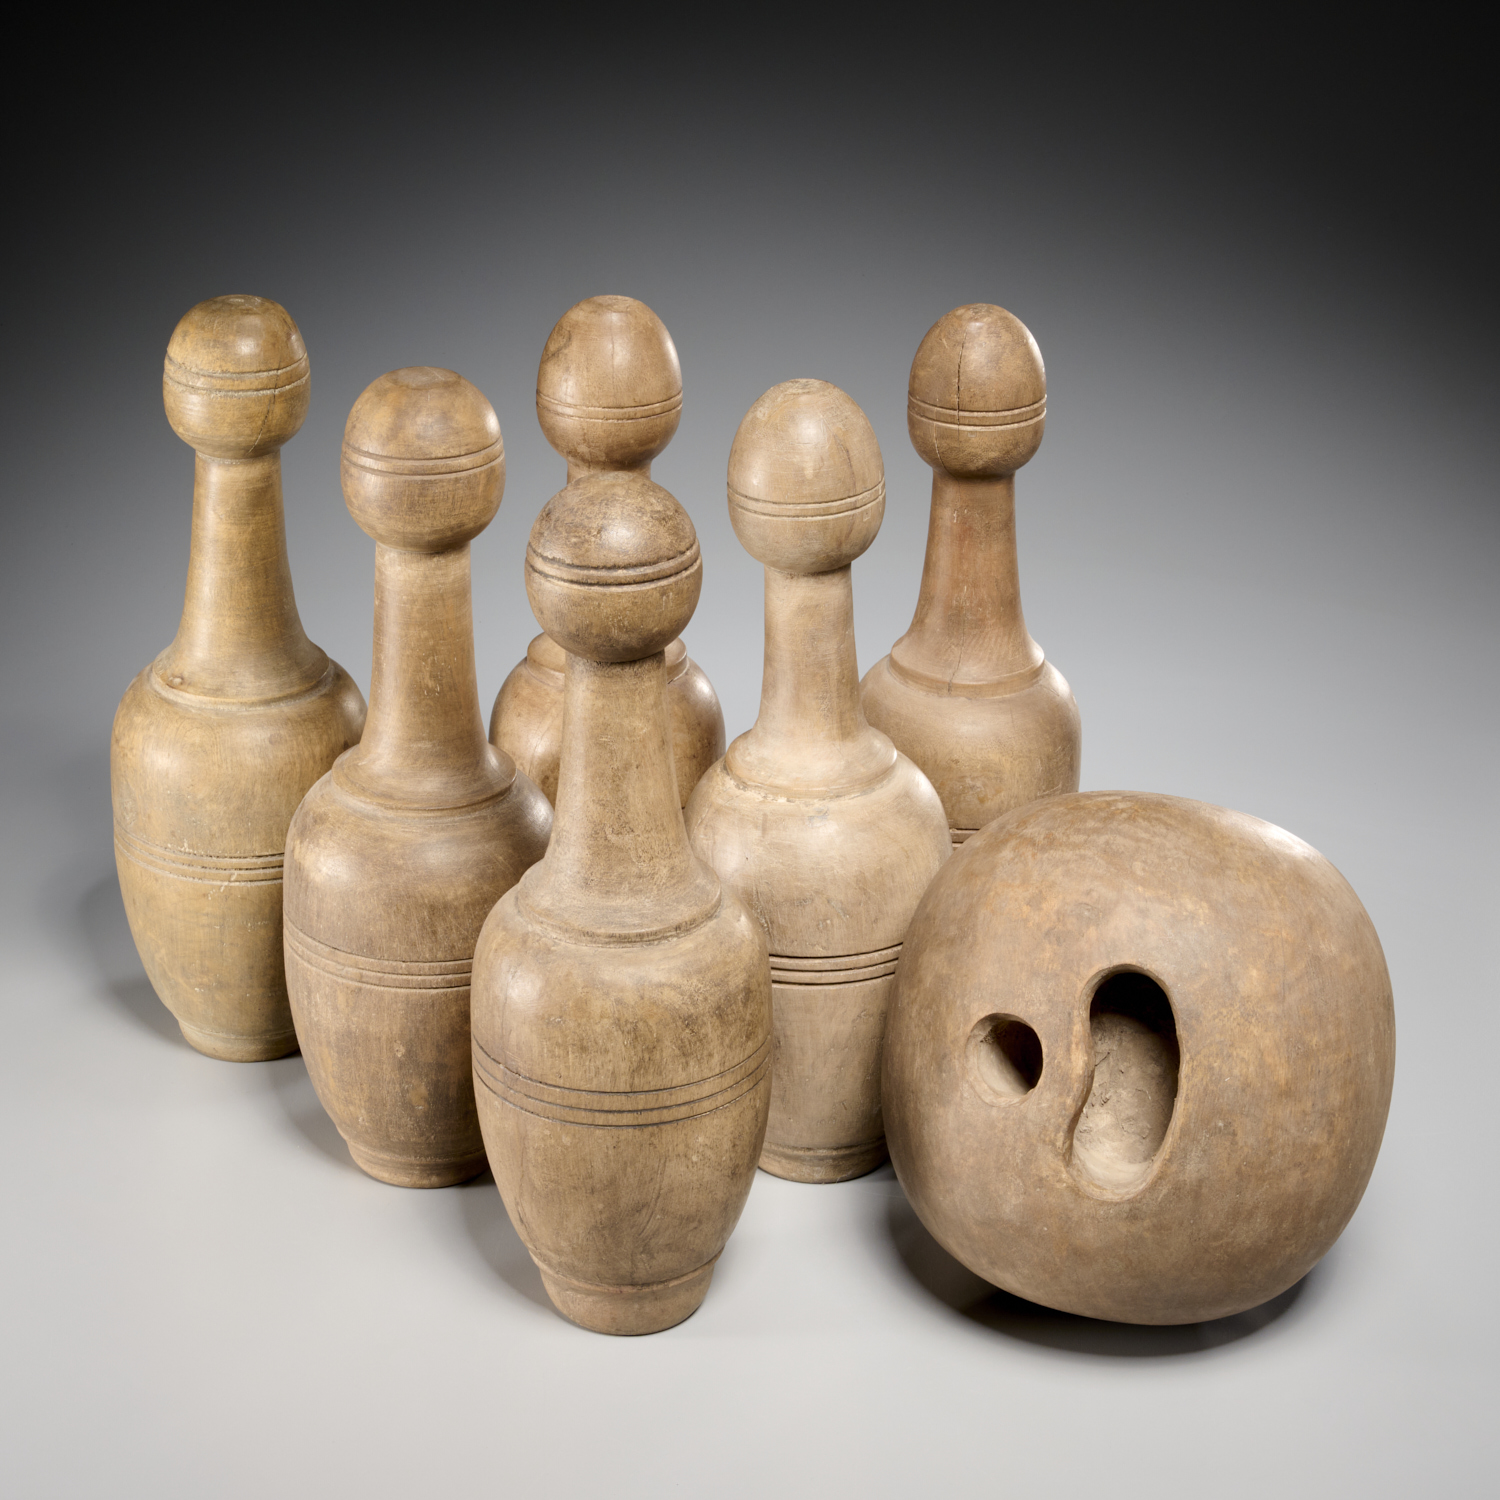 ANTIQUE WOODEN SKITTLES BOWLING 36038a